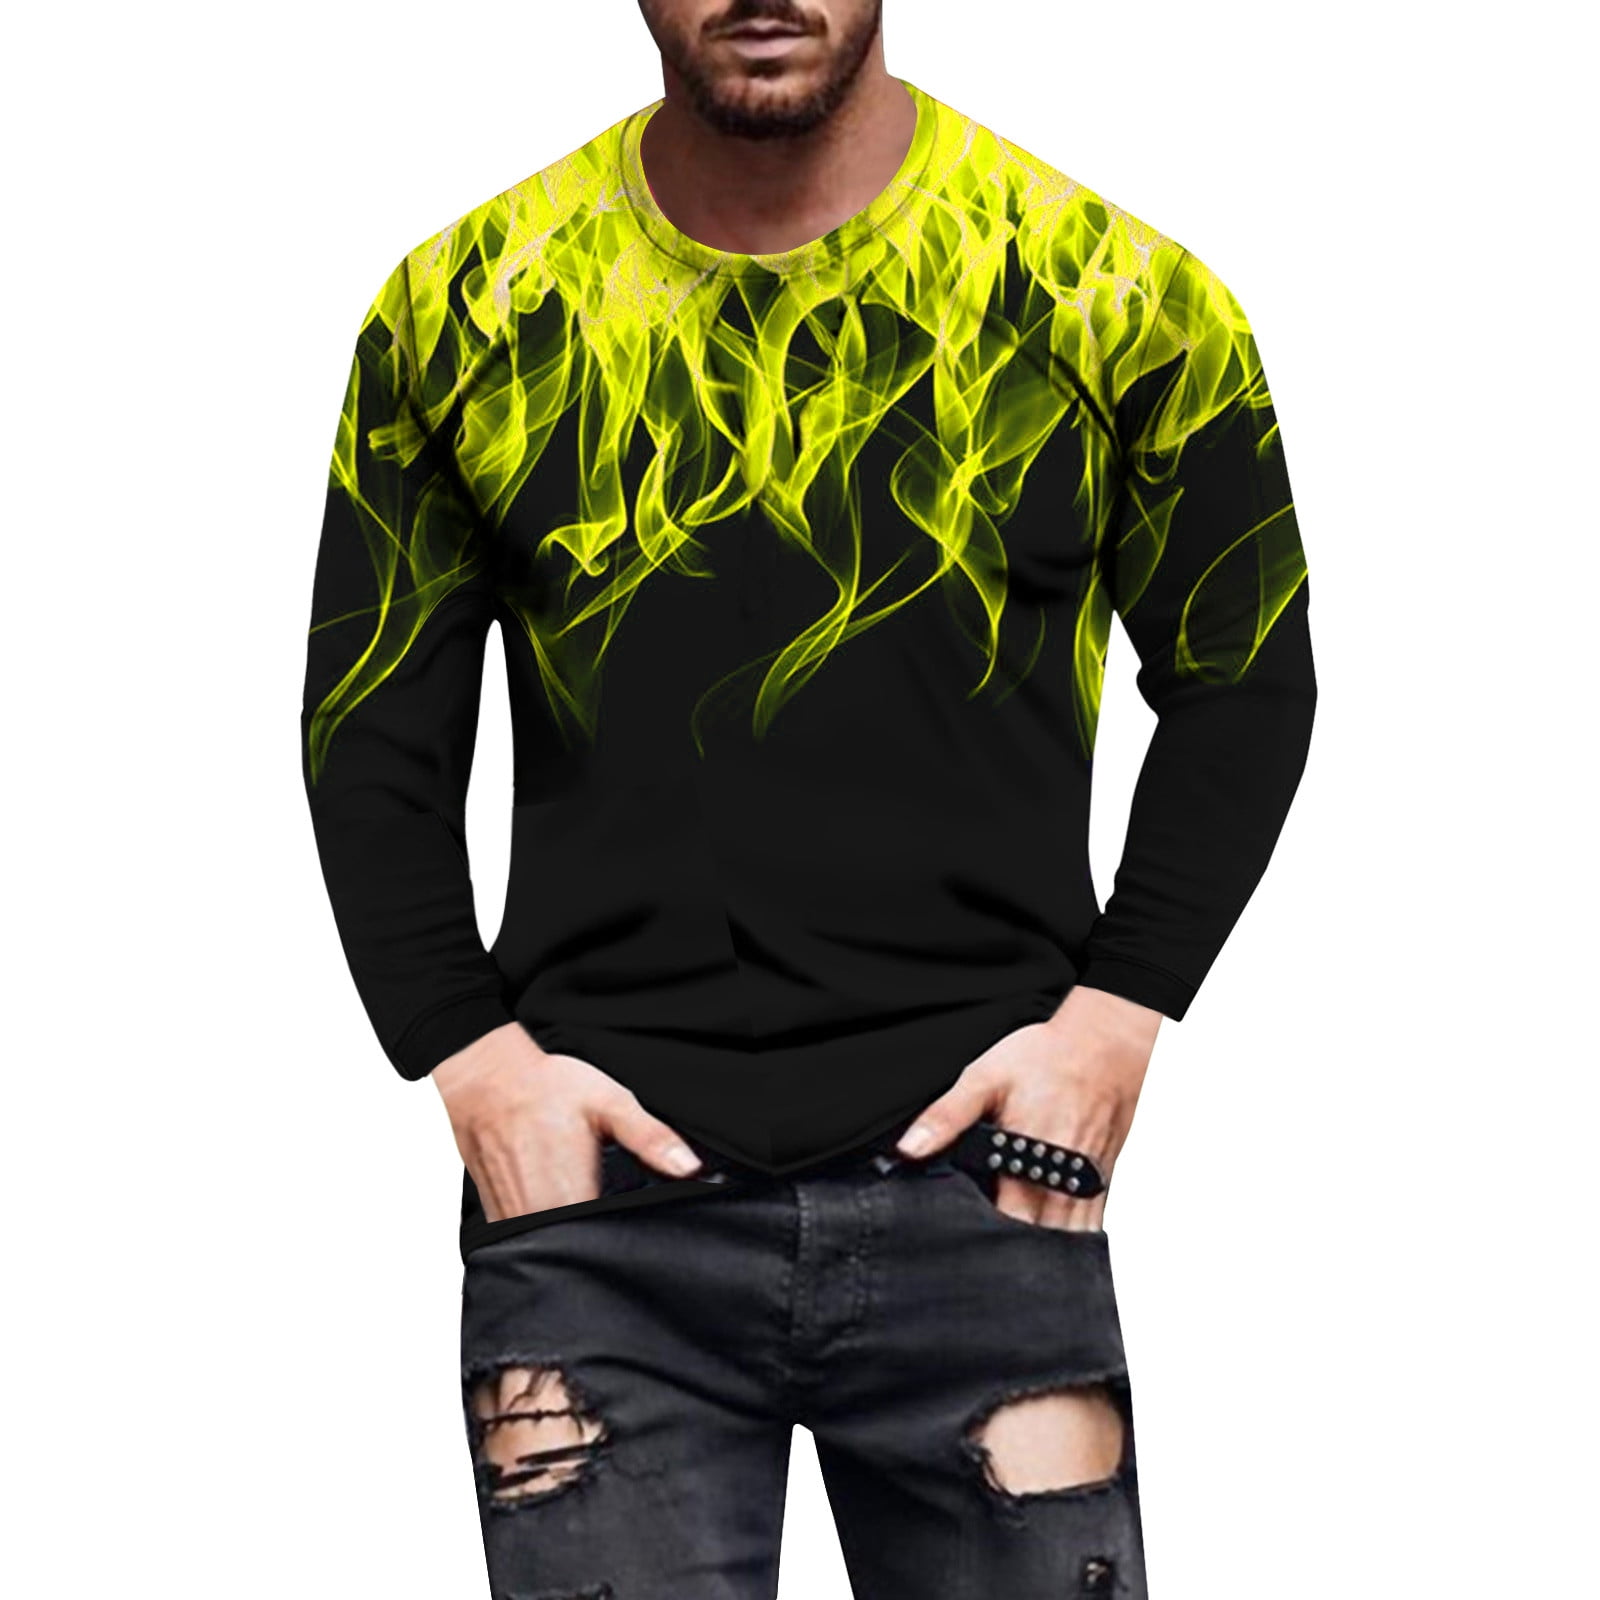 YYDGH On Clearance Long Sleeve 3D Flame Tee Shirts for Men,Mens Graphic T-Shirts  Fashion Casual Printed O-Neck Sport Athletic Pullover T-Shirt(Green,4XL) 